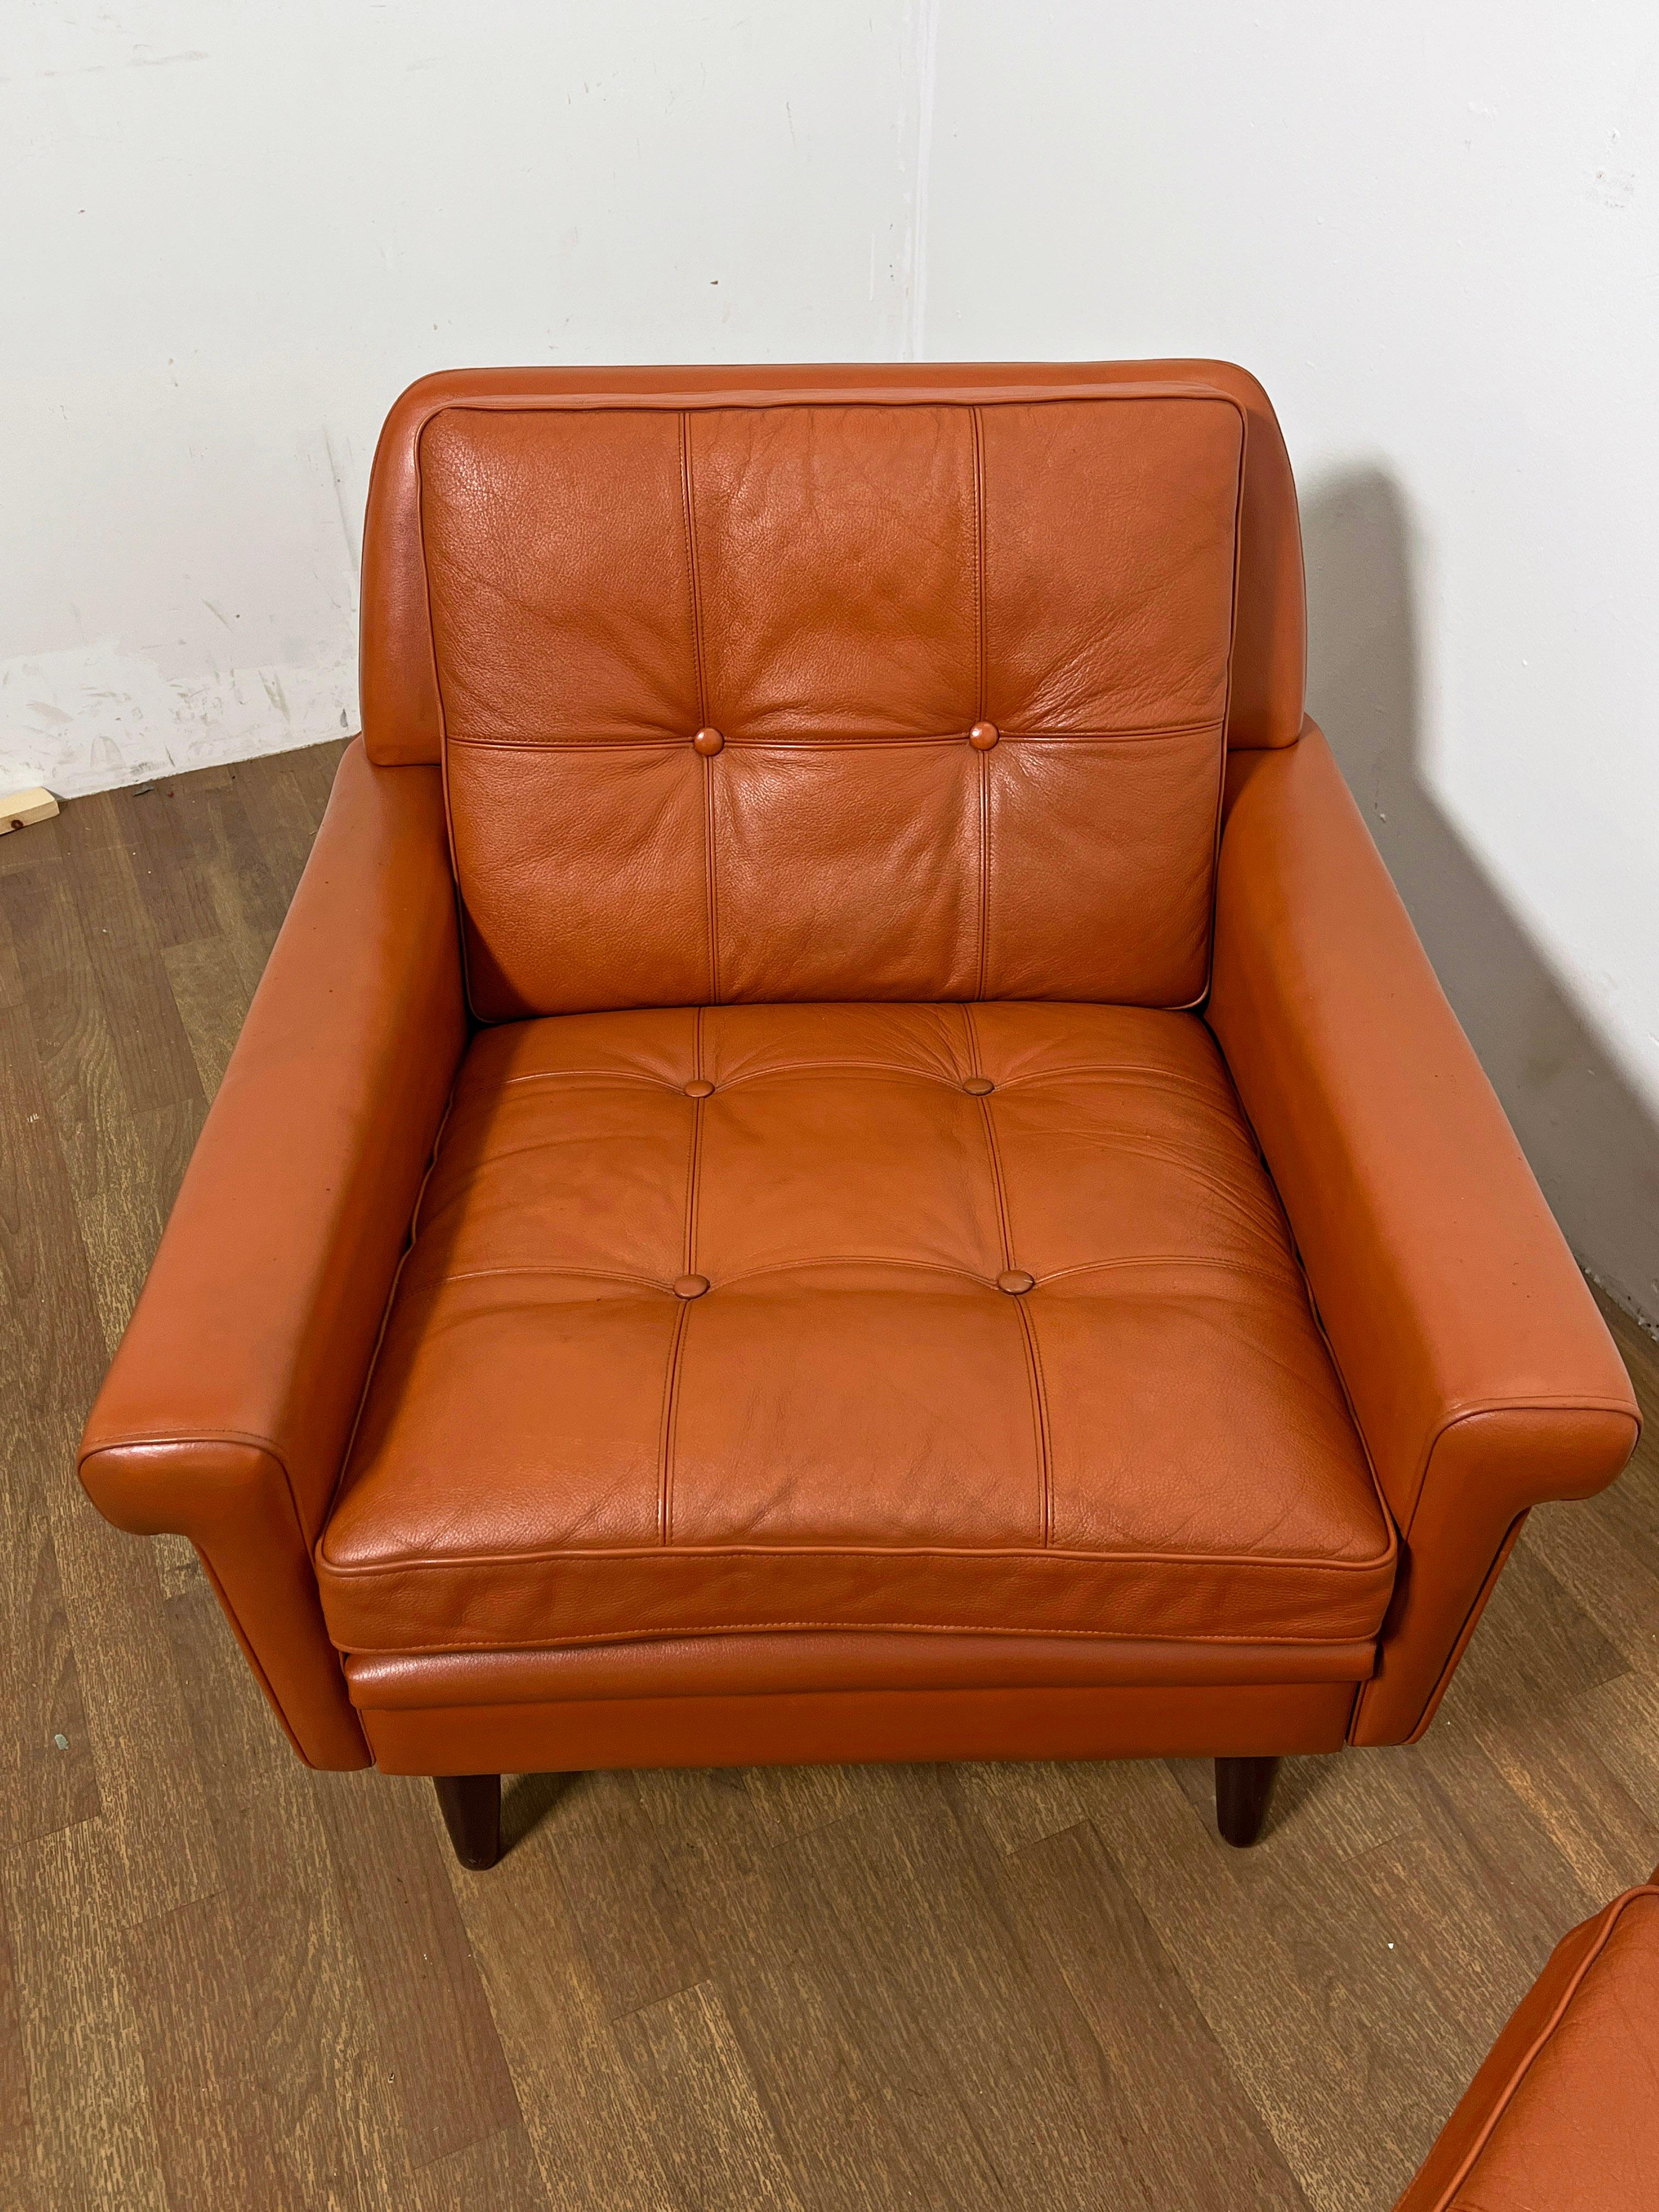 Pair of Danish Leather Lounge Chairs by Svend Skipper, Circa 1960s For Sale 3